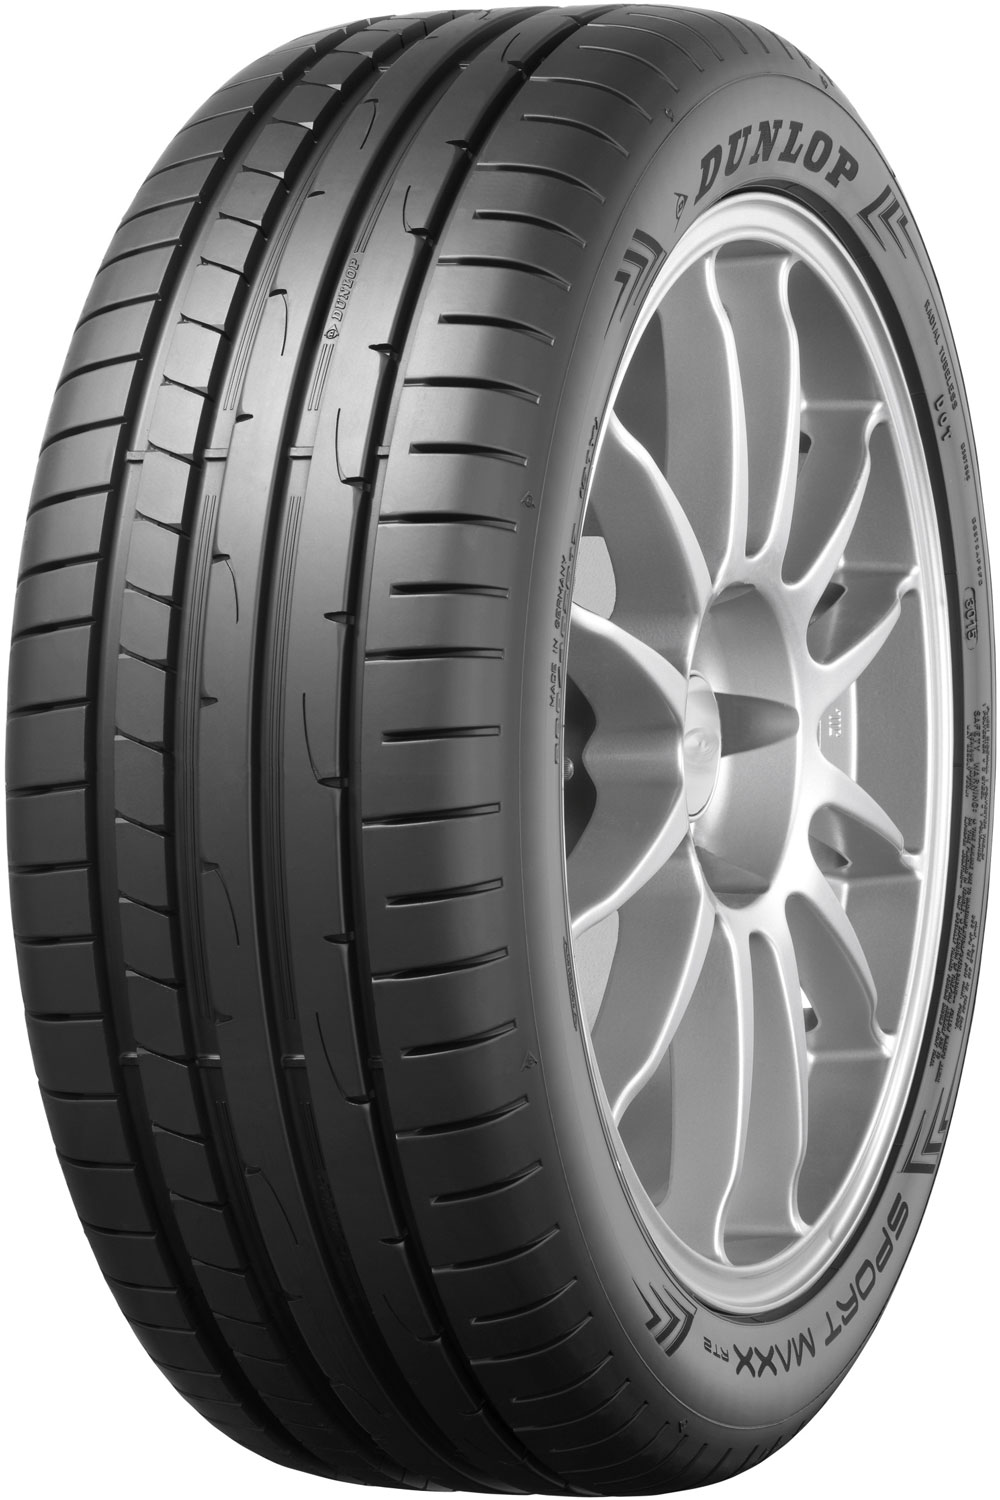 Anvelope auto DUNLOP Sport Maxx RT2 FP 255/45 R18 99Y